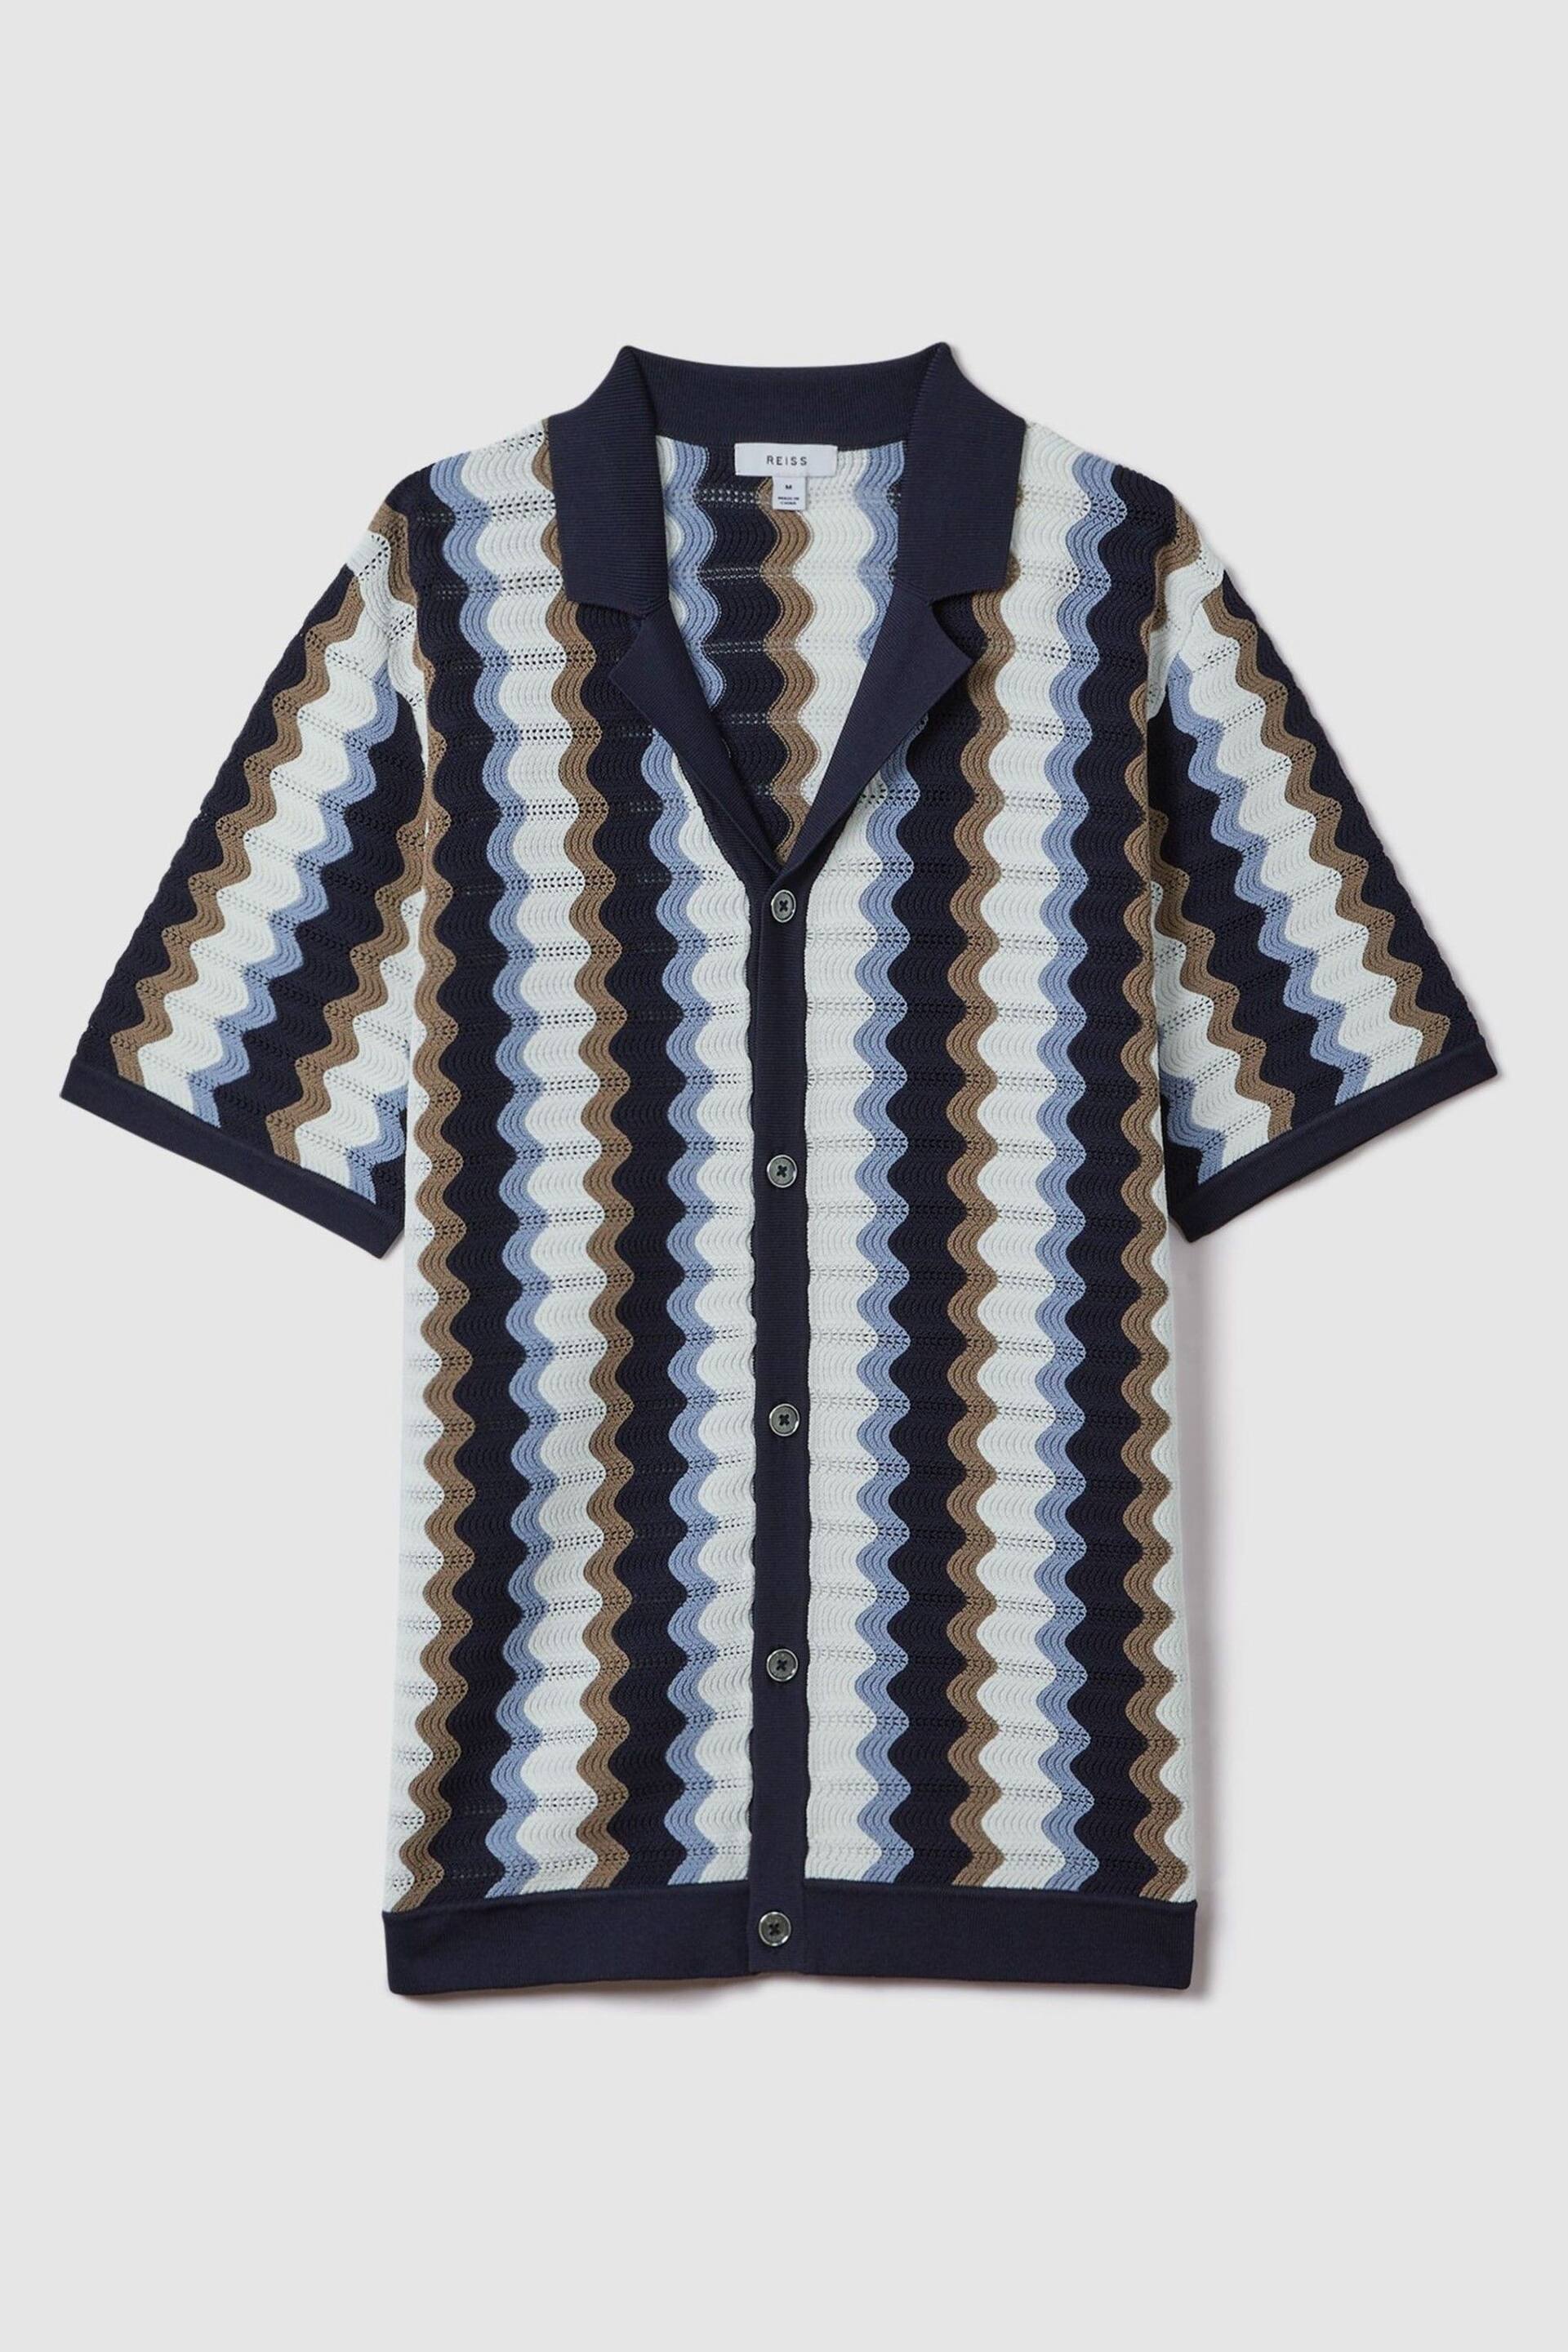 Reiss Blue Multi Waves Knitted Cuban Collar Shirt - Image 2 of 7